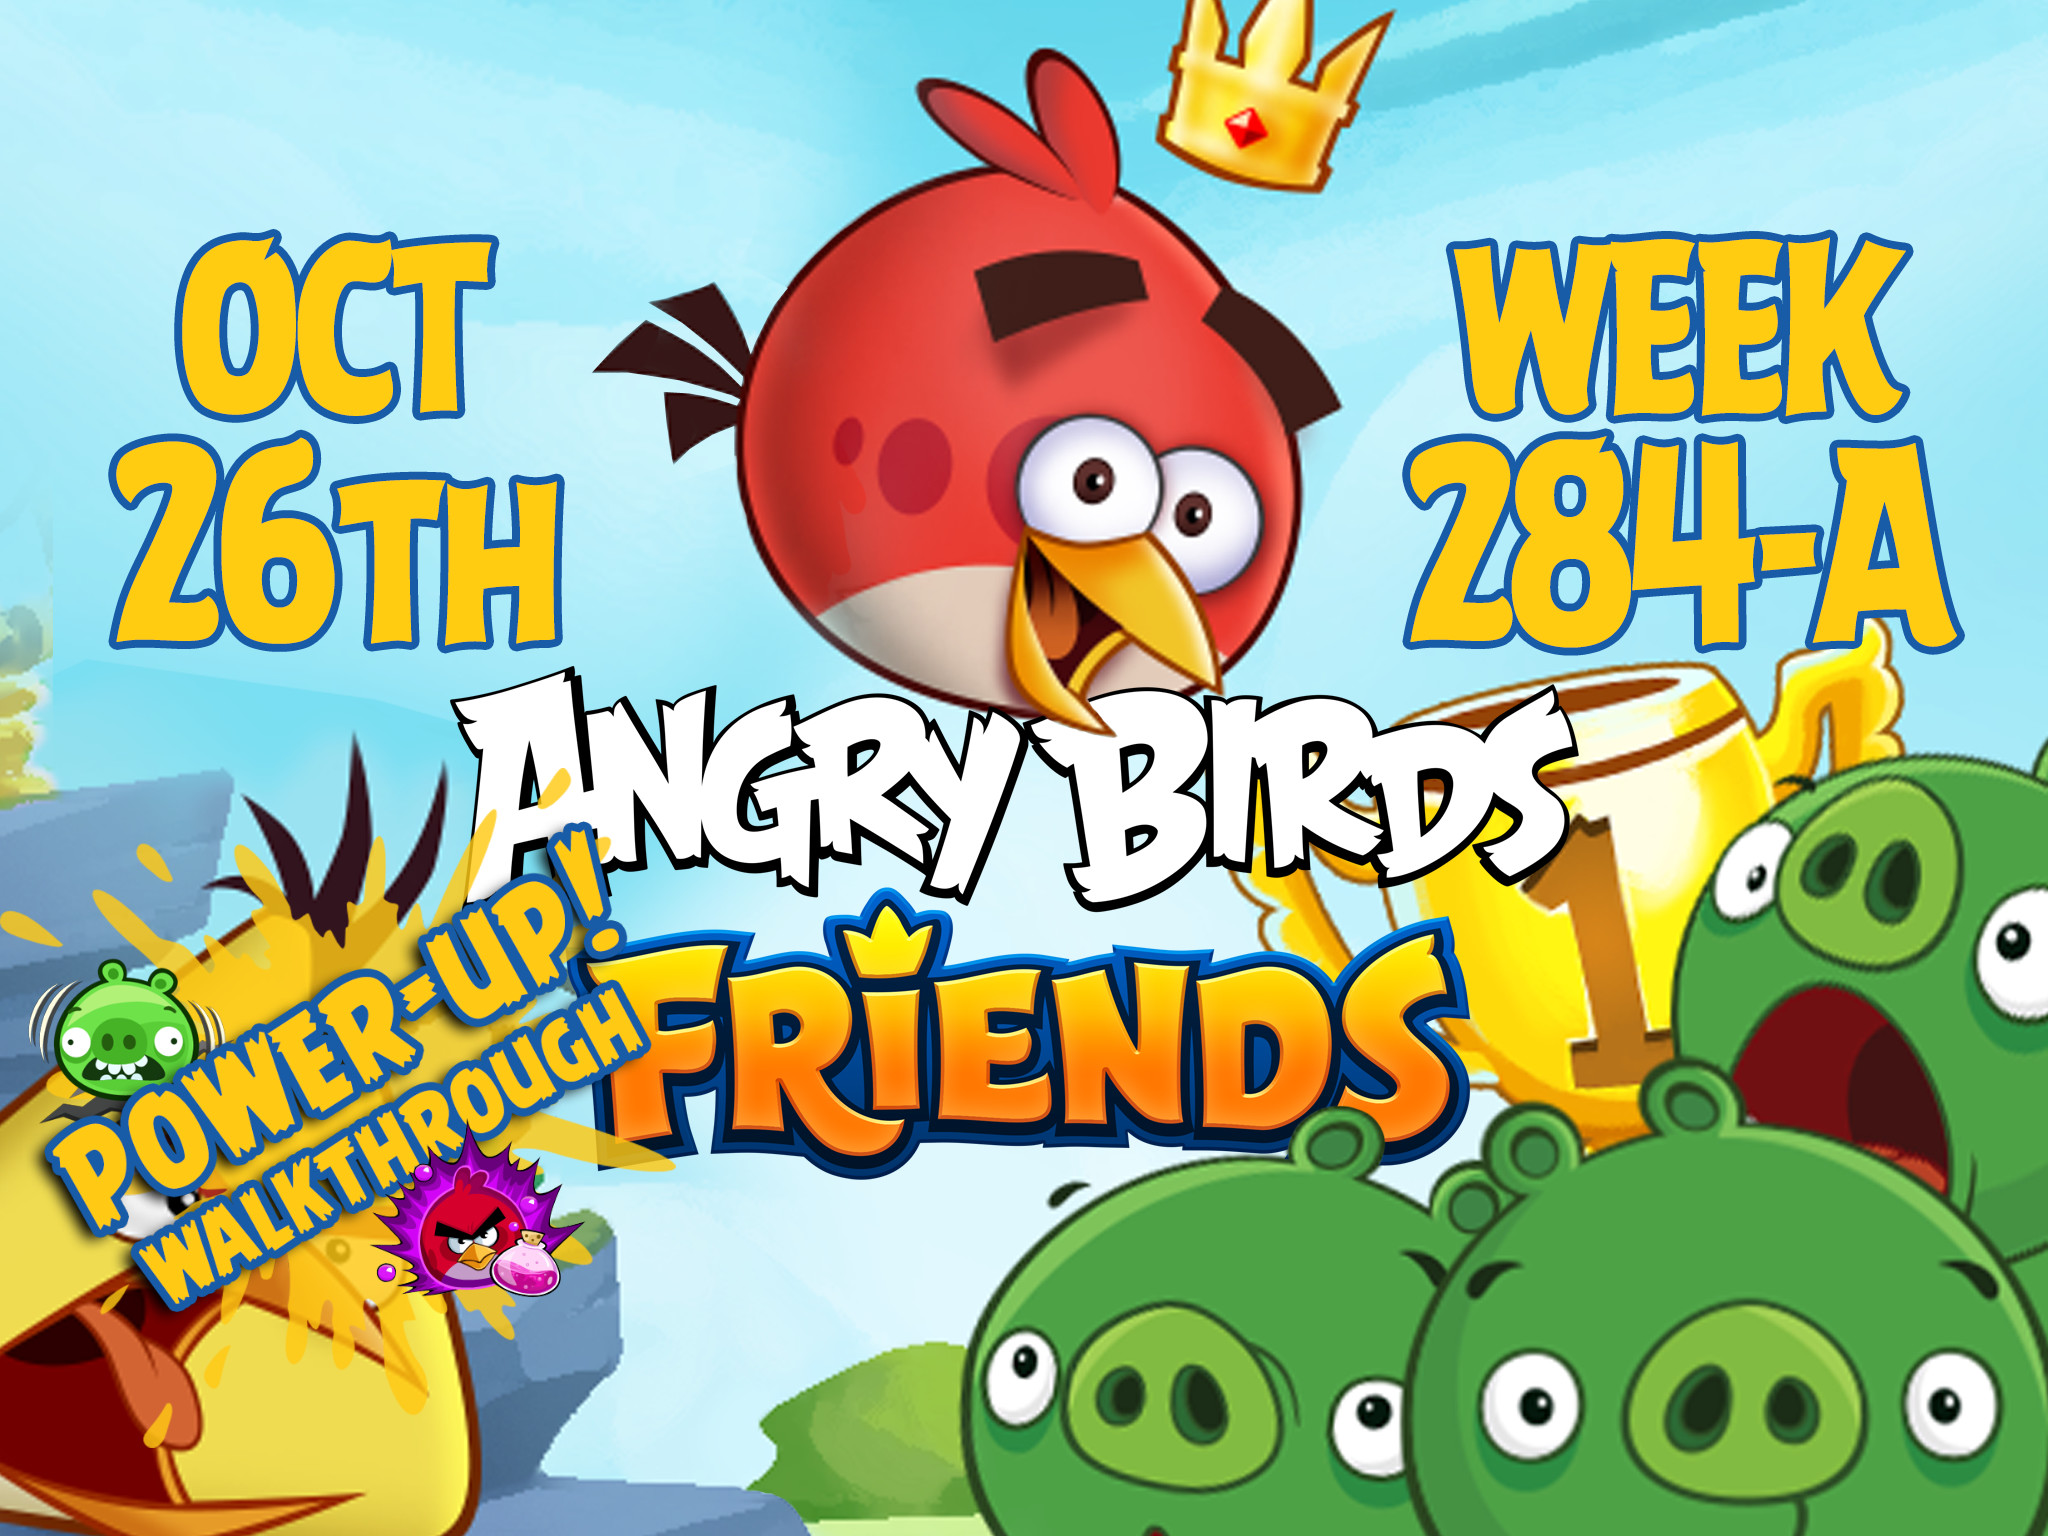 Angry Birds Friends Tournament Week 284-A Feature Image PU